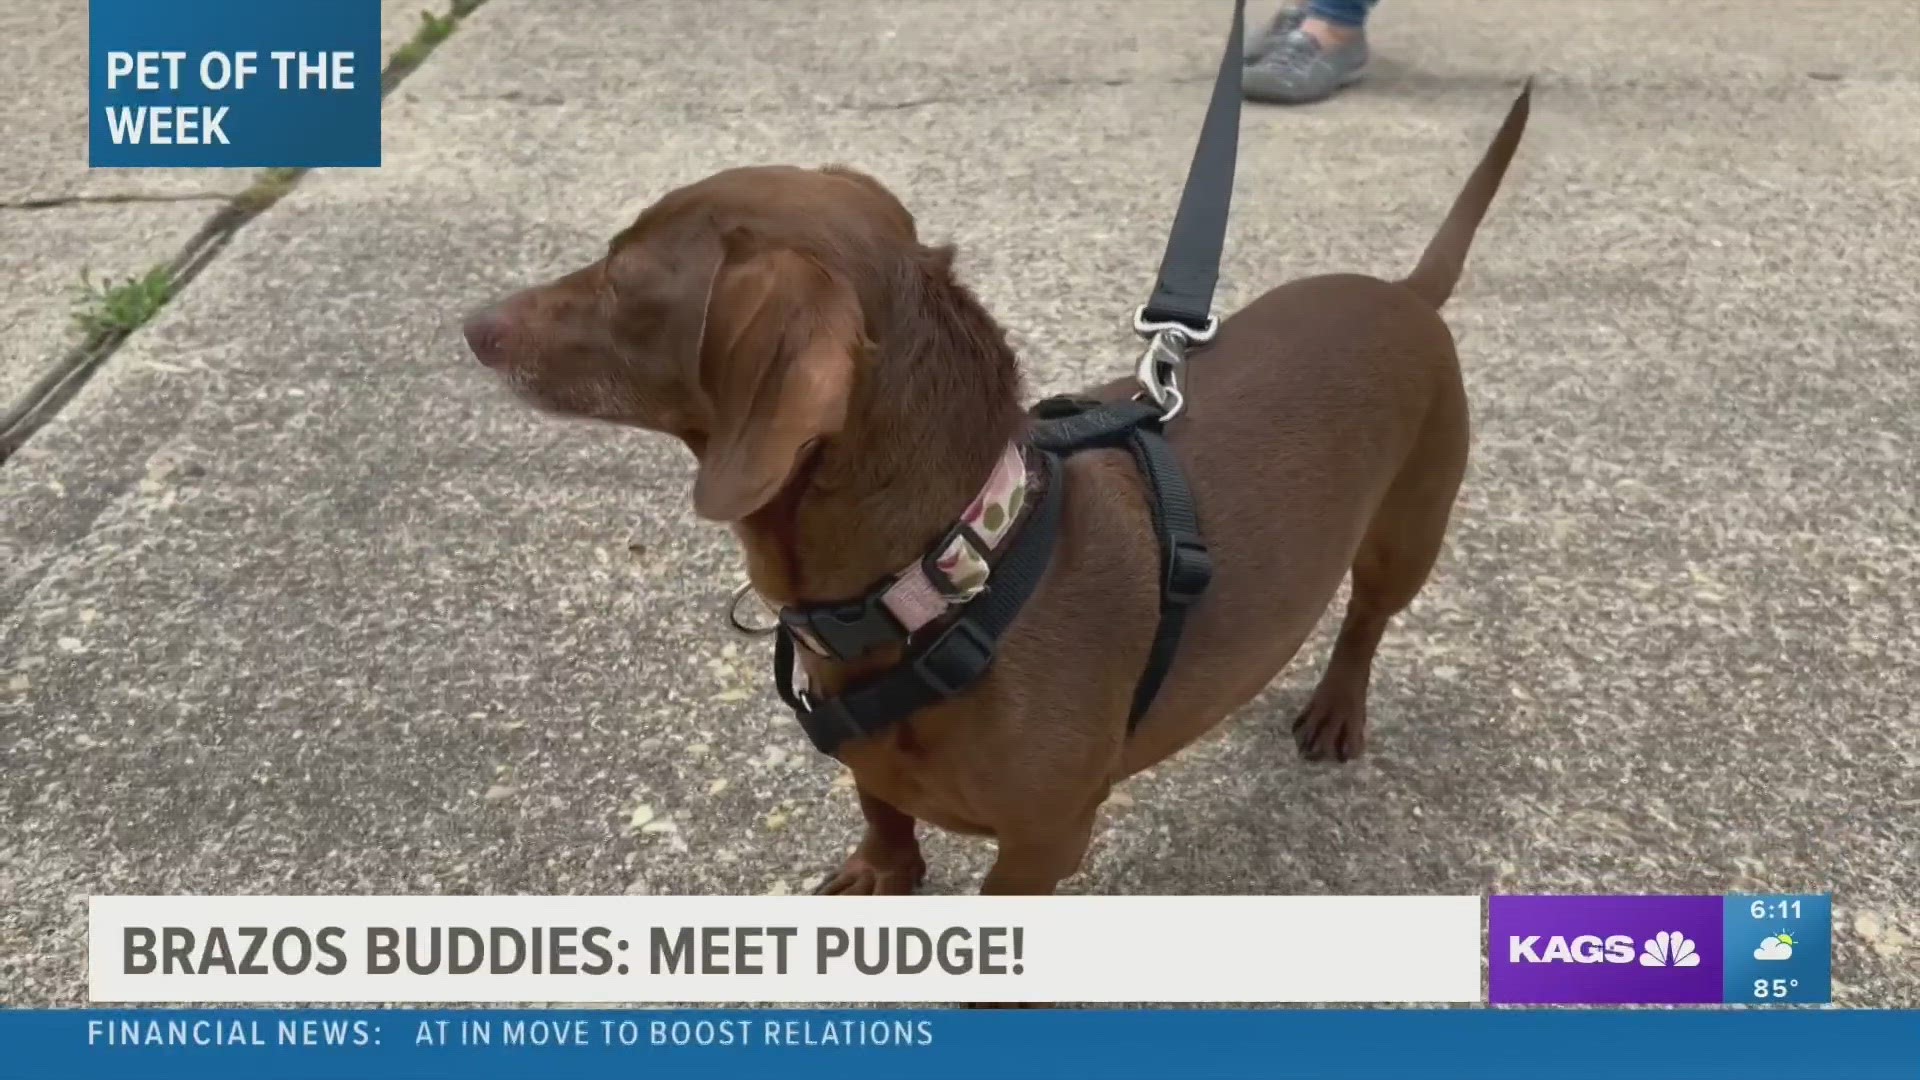 This week's featured Brazos Buddy is Pudge, a six-year-old Dachshund mix that's looking to be adopted.